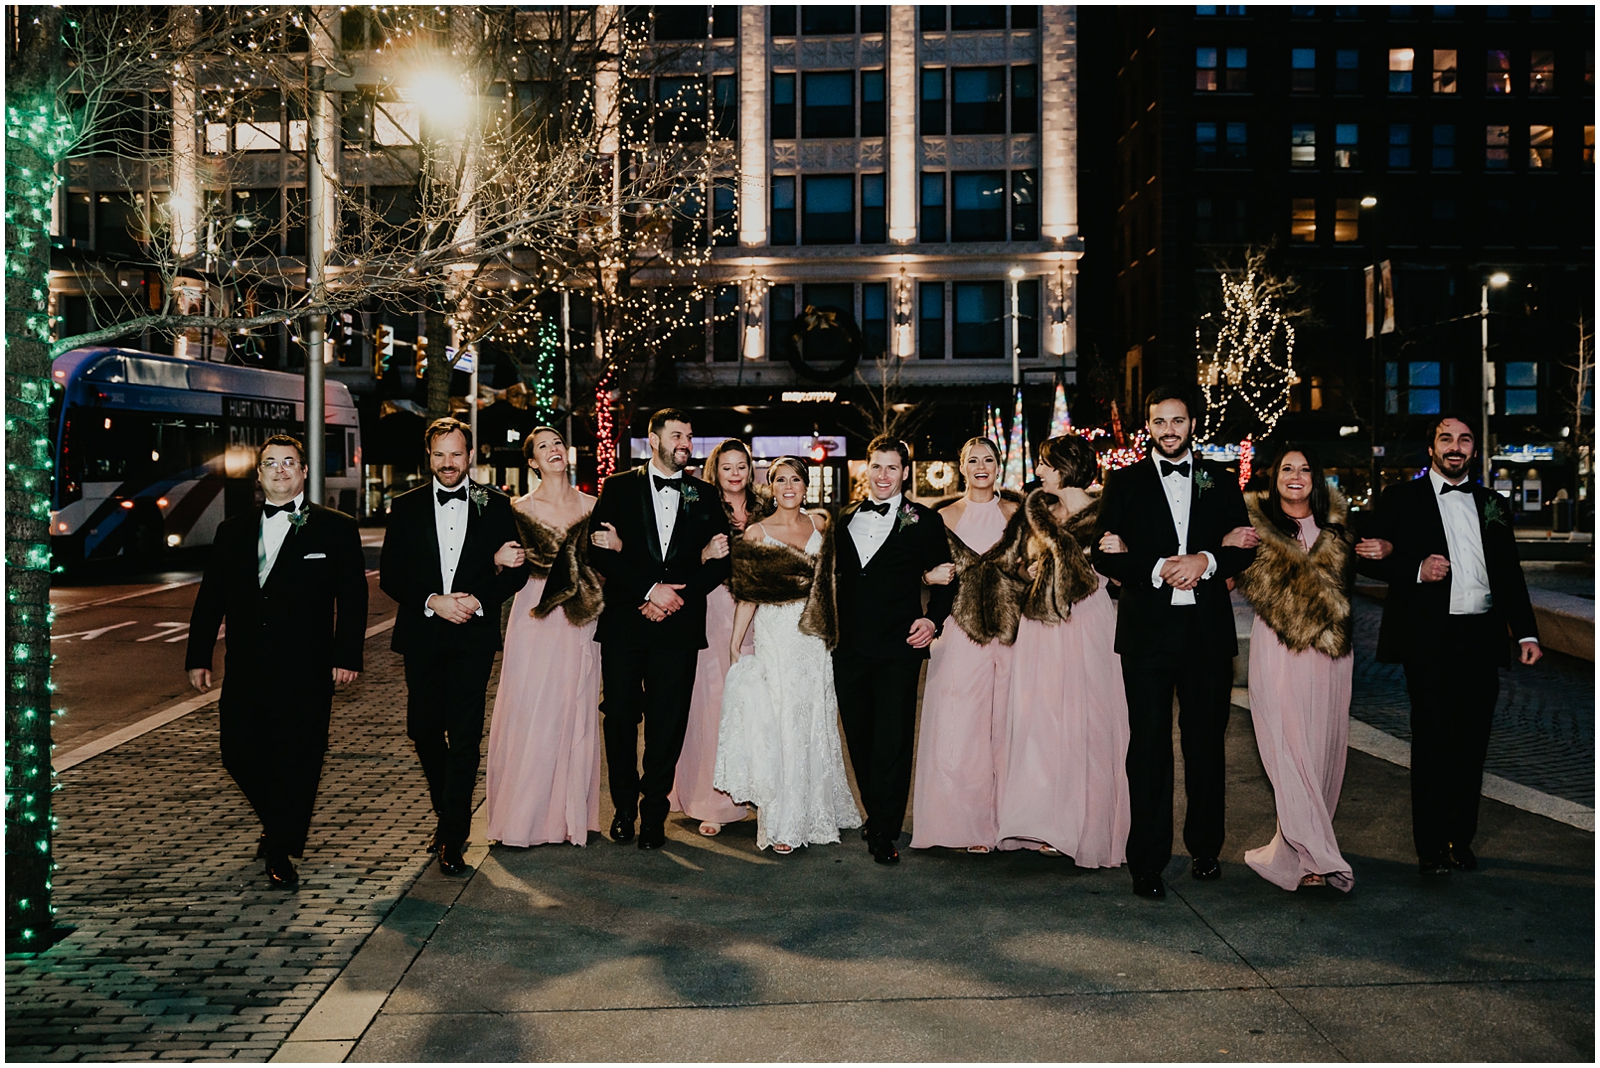 Bridal Party Portraits with Christmas Lights